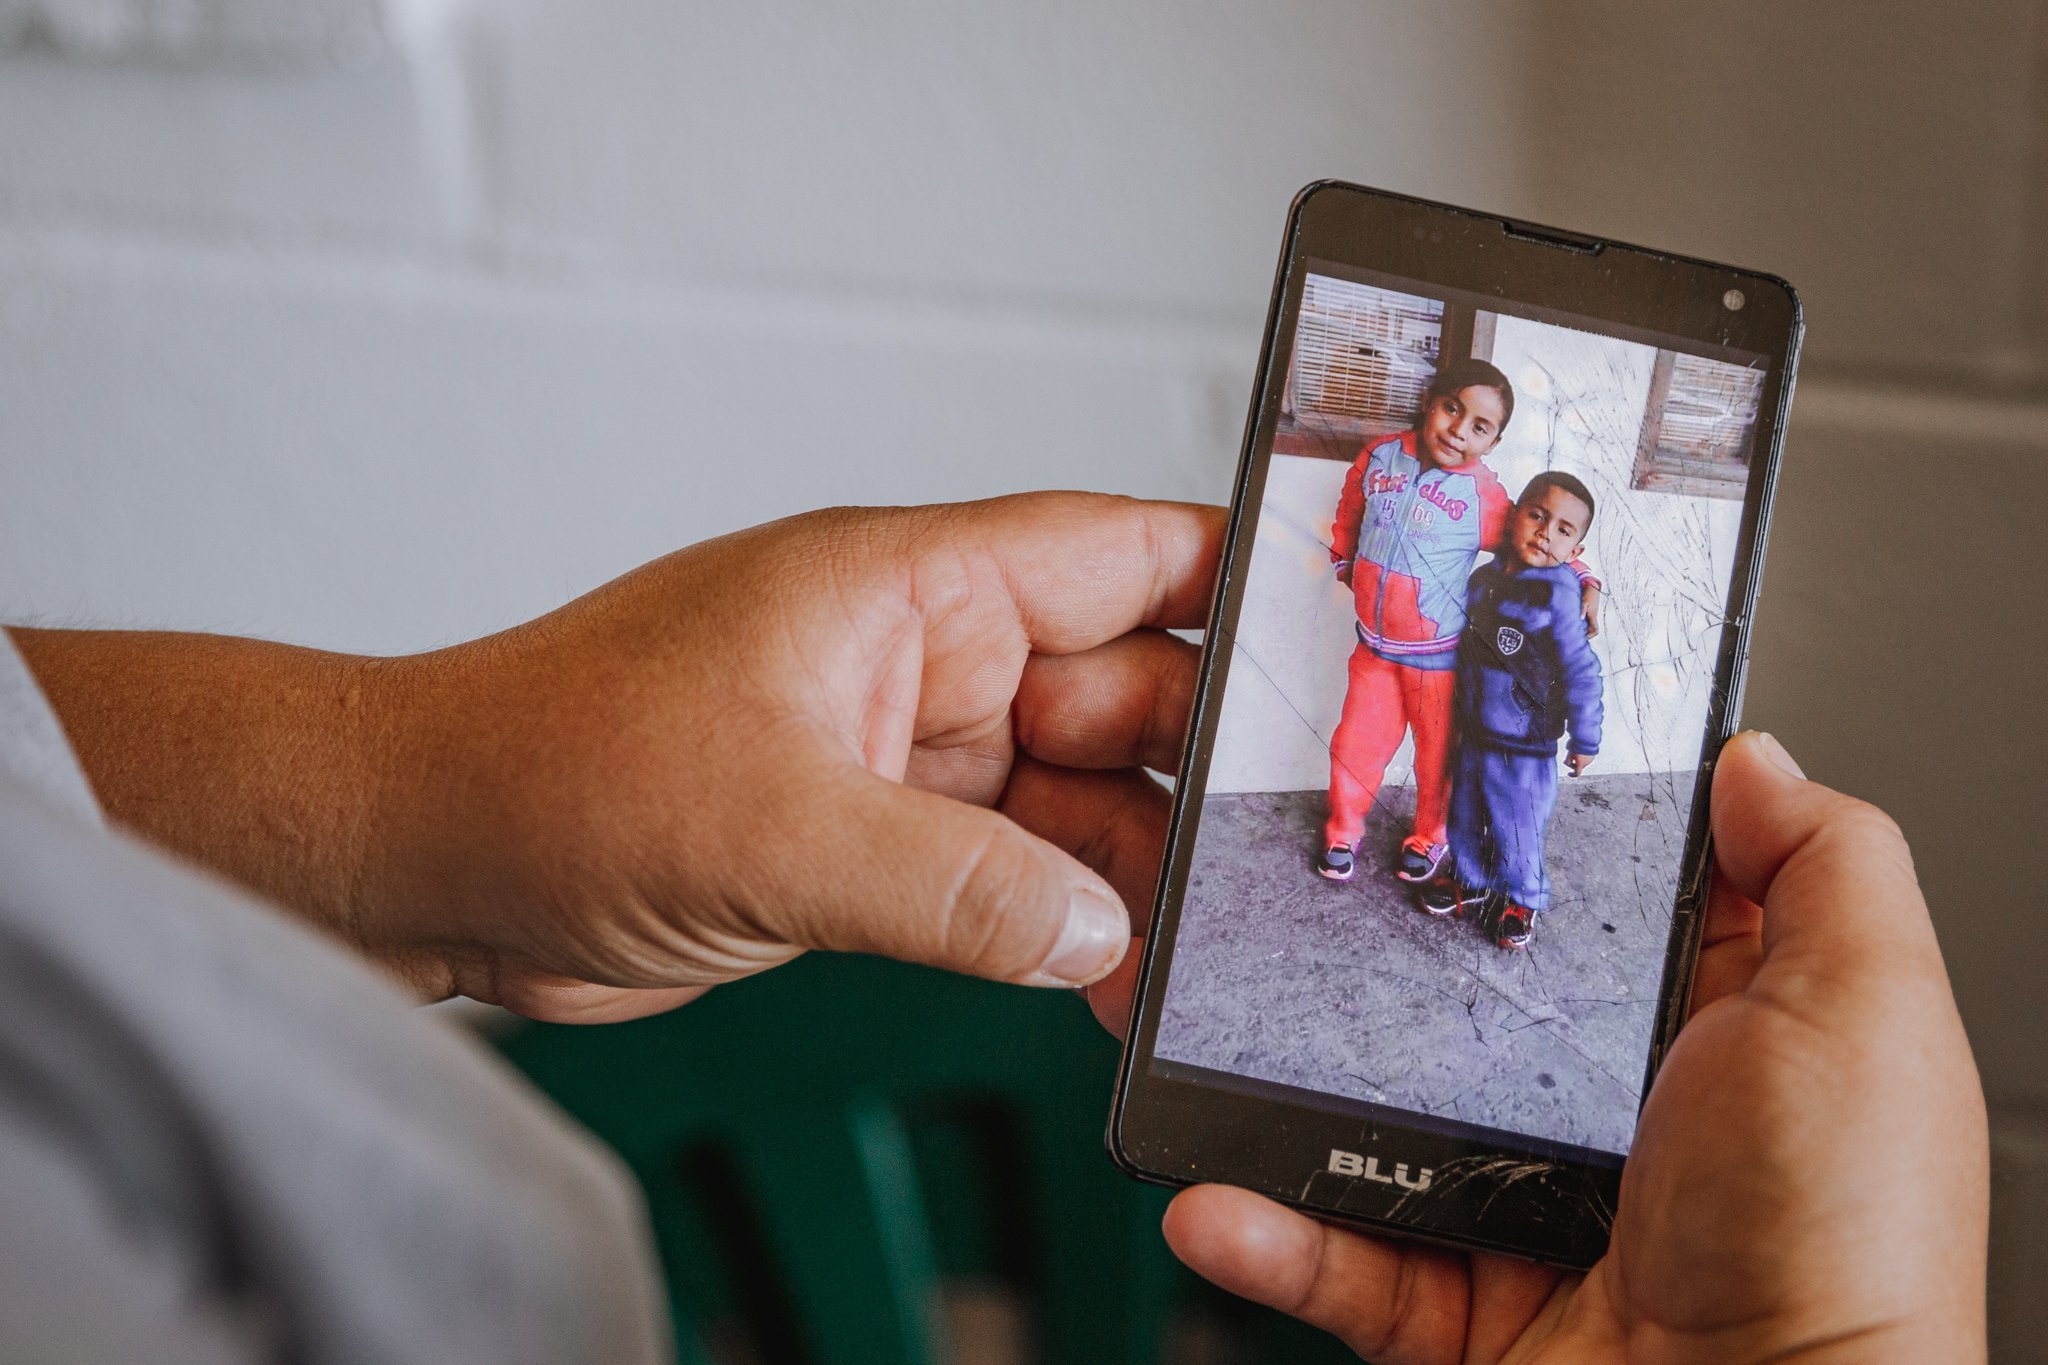  Melva Guadalupe Vázquez, 28, of Ciudad del Maíz, shows a photo of her children before her next shift at Lindy’s Seafood. “I hope my kids understand one day why I do this,” Vazquez said, “and why I have to be away.” 